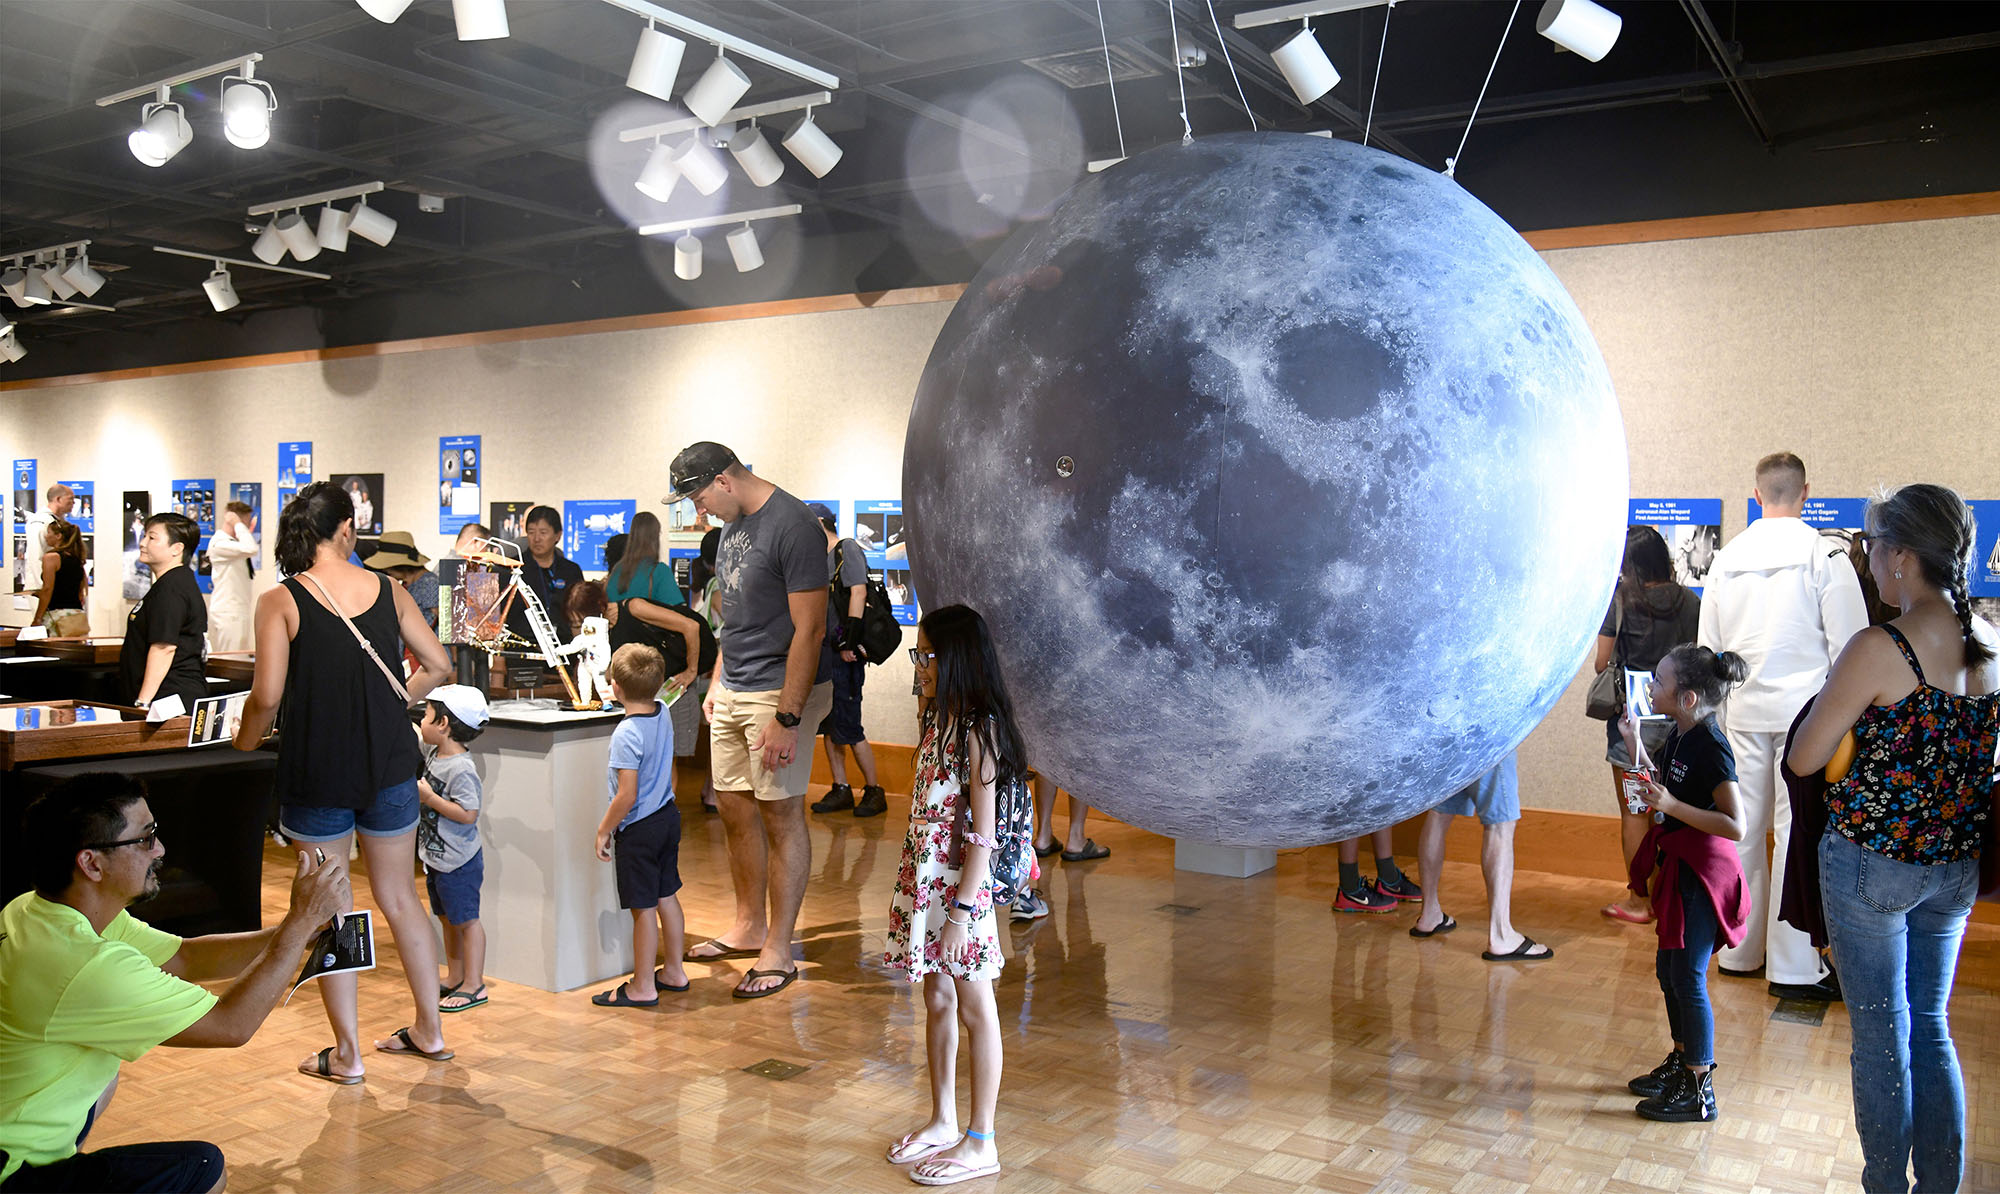 people walking around the gallery with various moon landing related exhibits